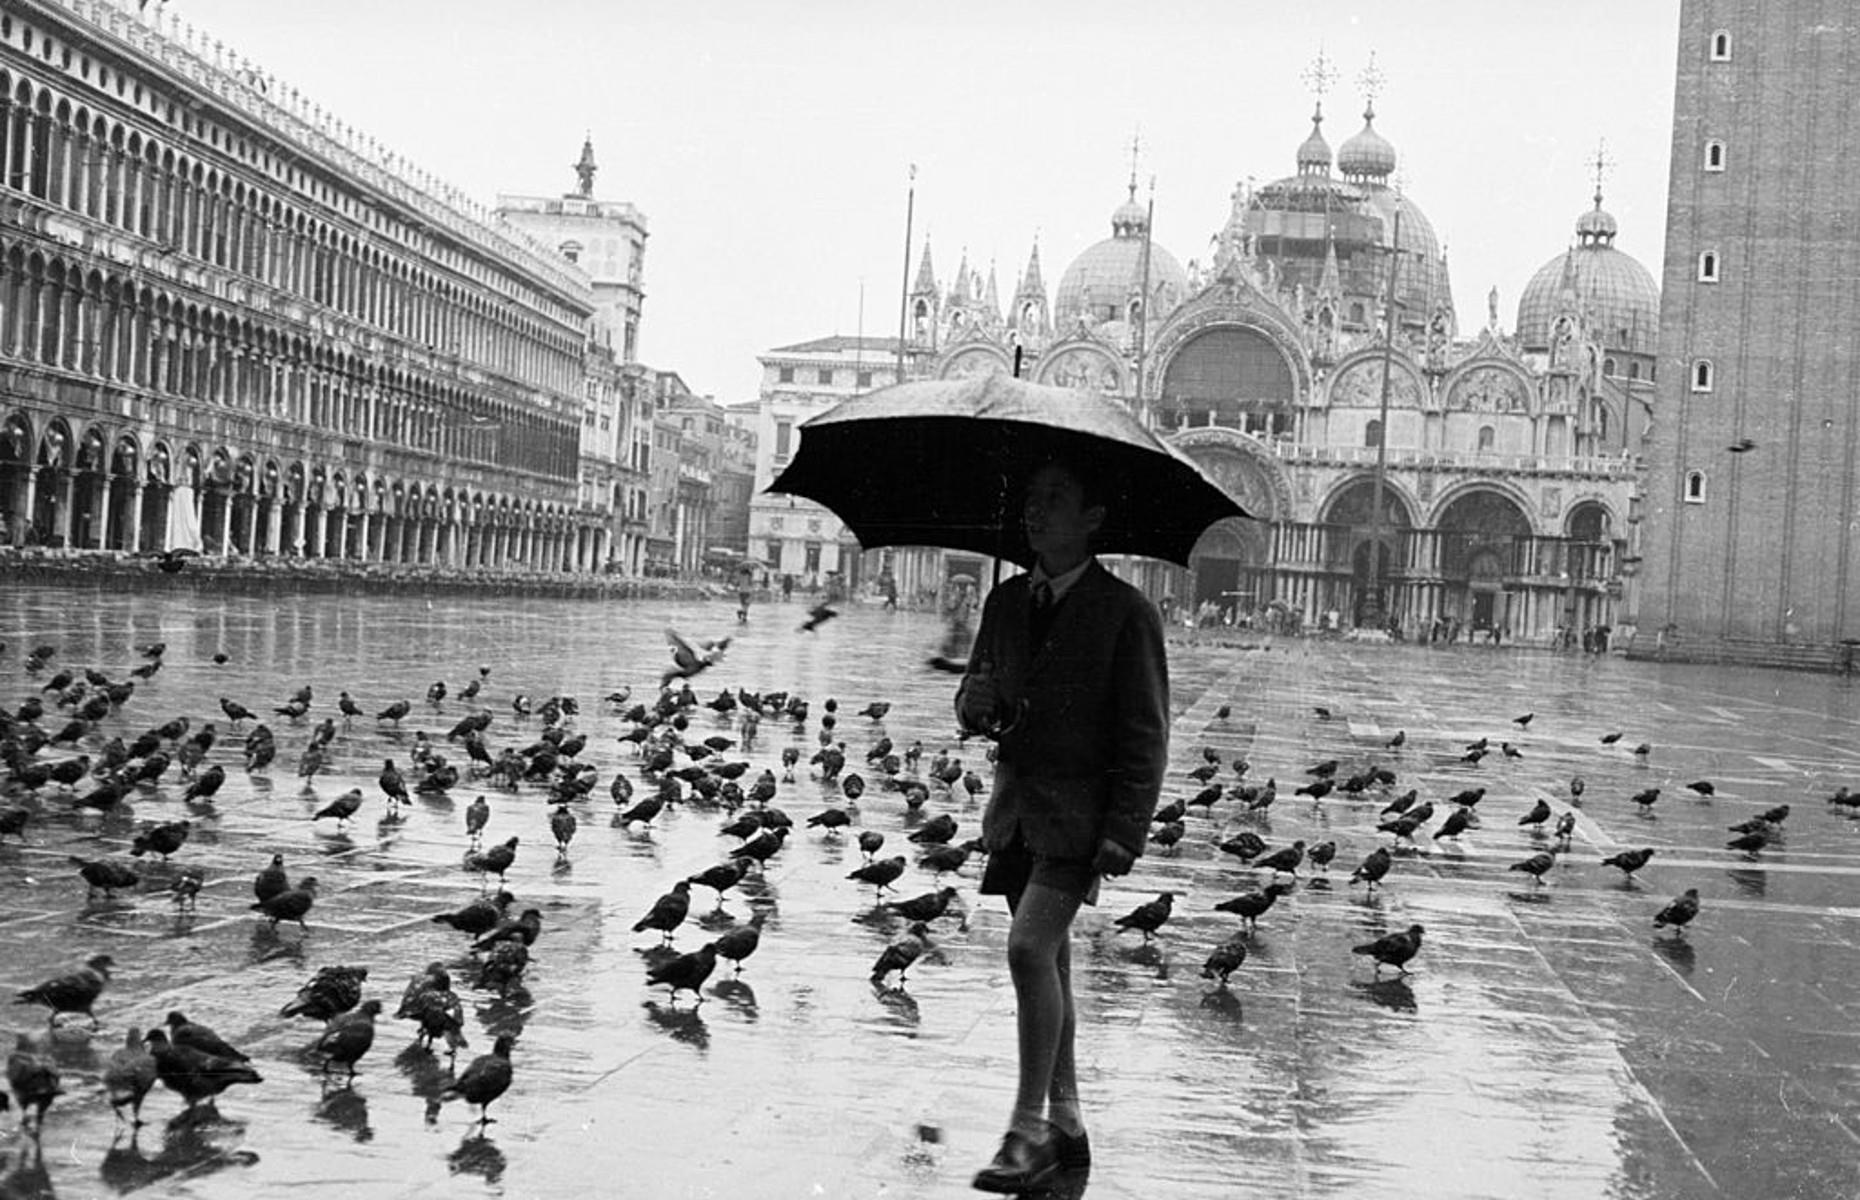 <p>Venice experienced serious flooding in the 1960s and this picture, taken in 1958 in St Mark’s Square, seems to presage that event. Since that time, the number of tourists has grown year on year. The arrival of enormous cruise ships into the harbor dwarfed the city and its beautiful architecture. They were only <a href="https://www.bbc.co.uk/news/world-europe-56592109">banned in 2021</a>. During pandemic lockdowns, dolphins returned to the harbor, but the lack of tourists was financially disastrous for the city.</p>  <p><a href="https://www.loveexploring.com/galleries/96018/incredible-images-that-show-how-the-earth-is-healing-during-coronavirus?page=1"><strong>Incredible images show how the Earth began to heal during the pandemic</strong></a></p>